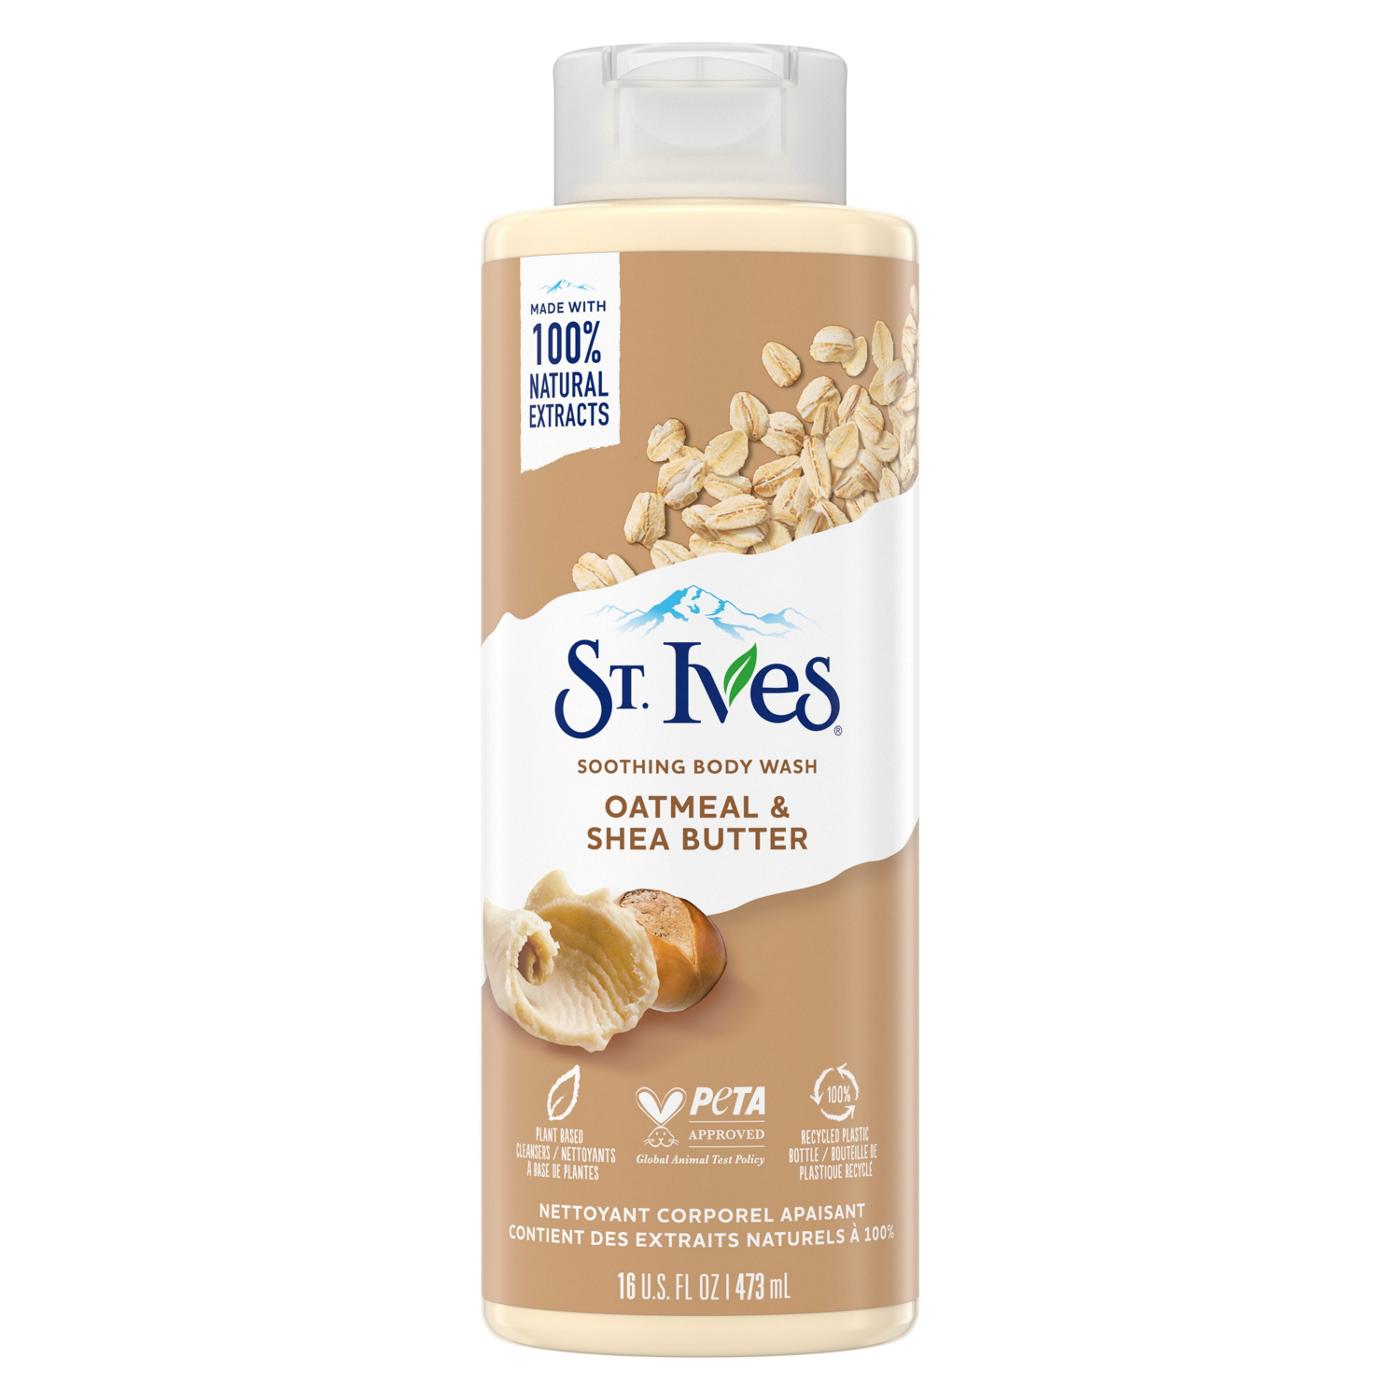 St. Ives Soothing Body Wash - Oatmeal & Shea Butter; image 1 of 4